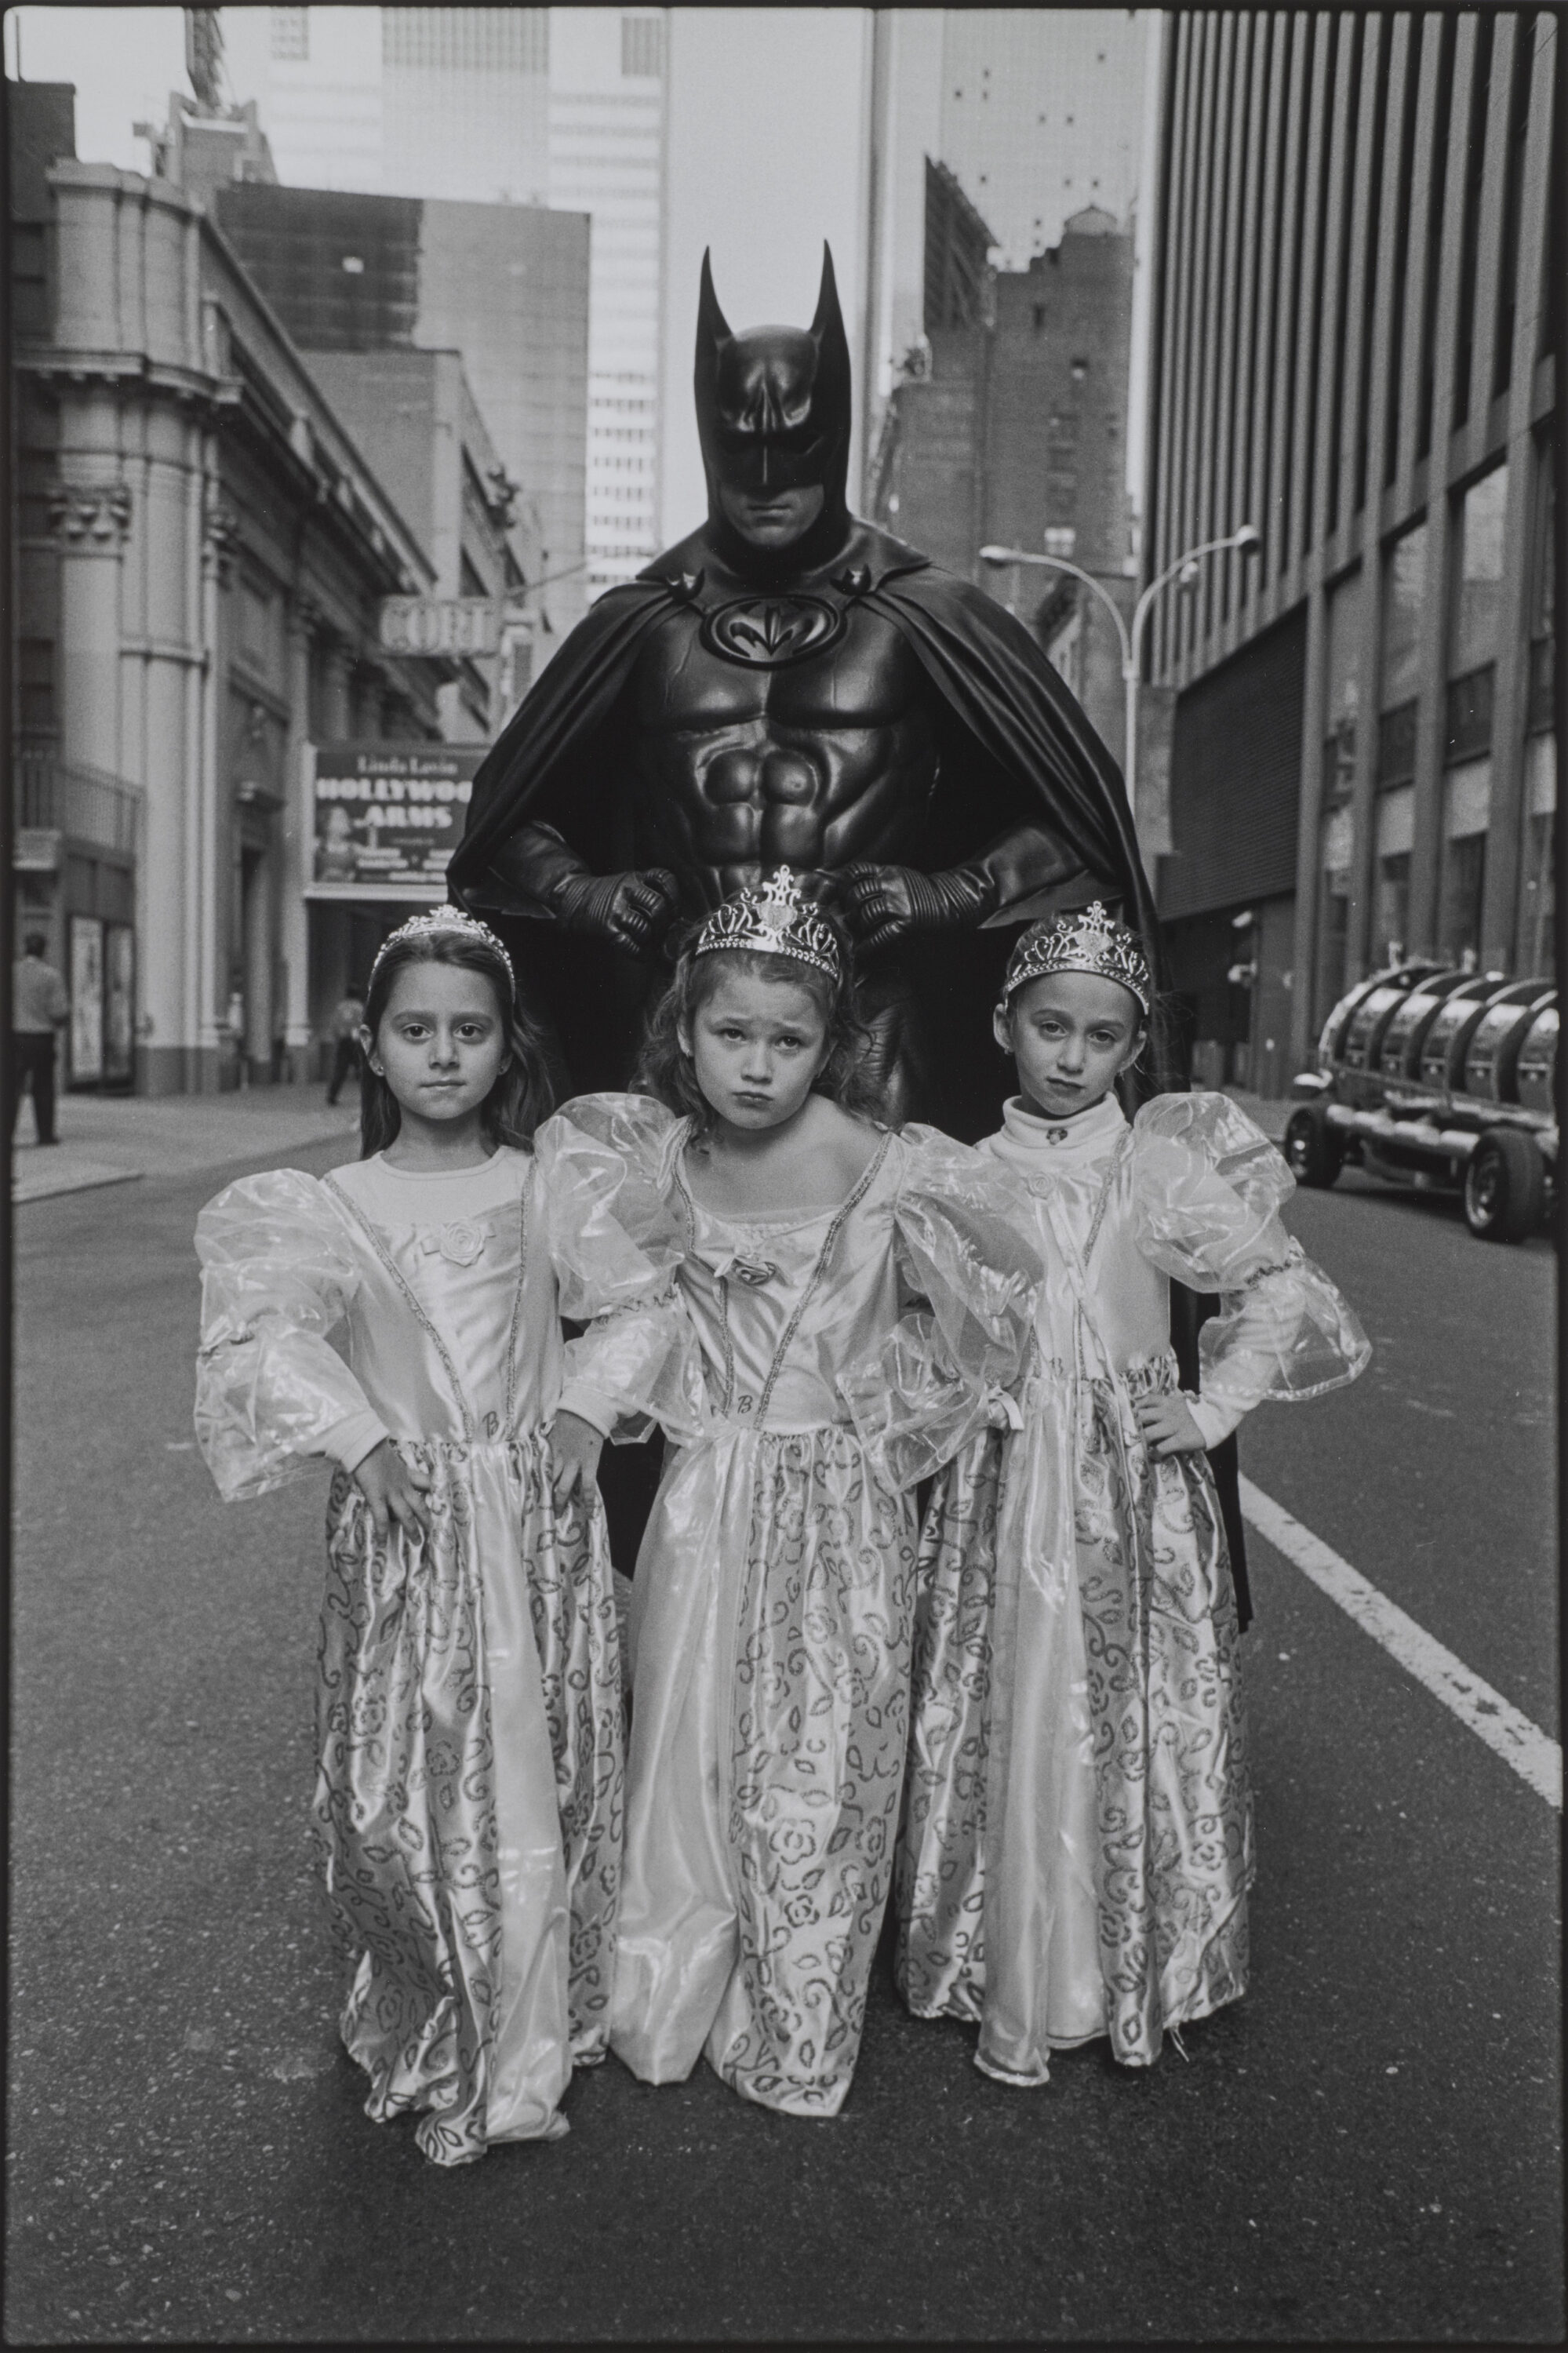 A black-and-white photograph of three light-skinned young girls in princess costumes of dresses and crowns standing in front of an adult in a full Batman costume. They all stand in the middle of a city street with defiant poses, their hands on their hips and faces serious.